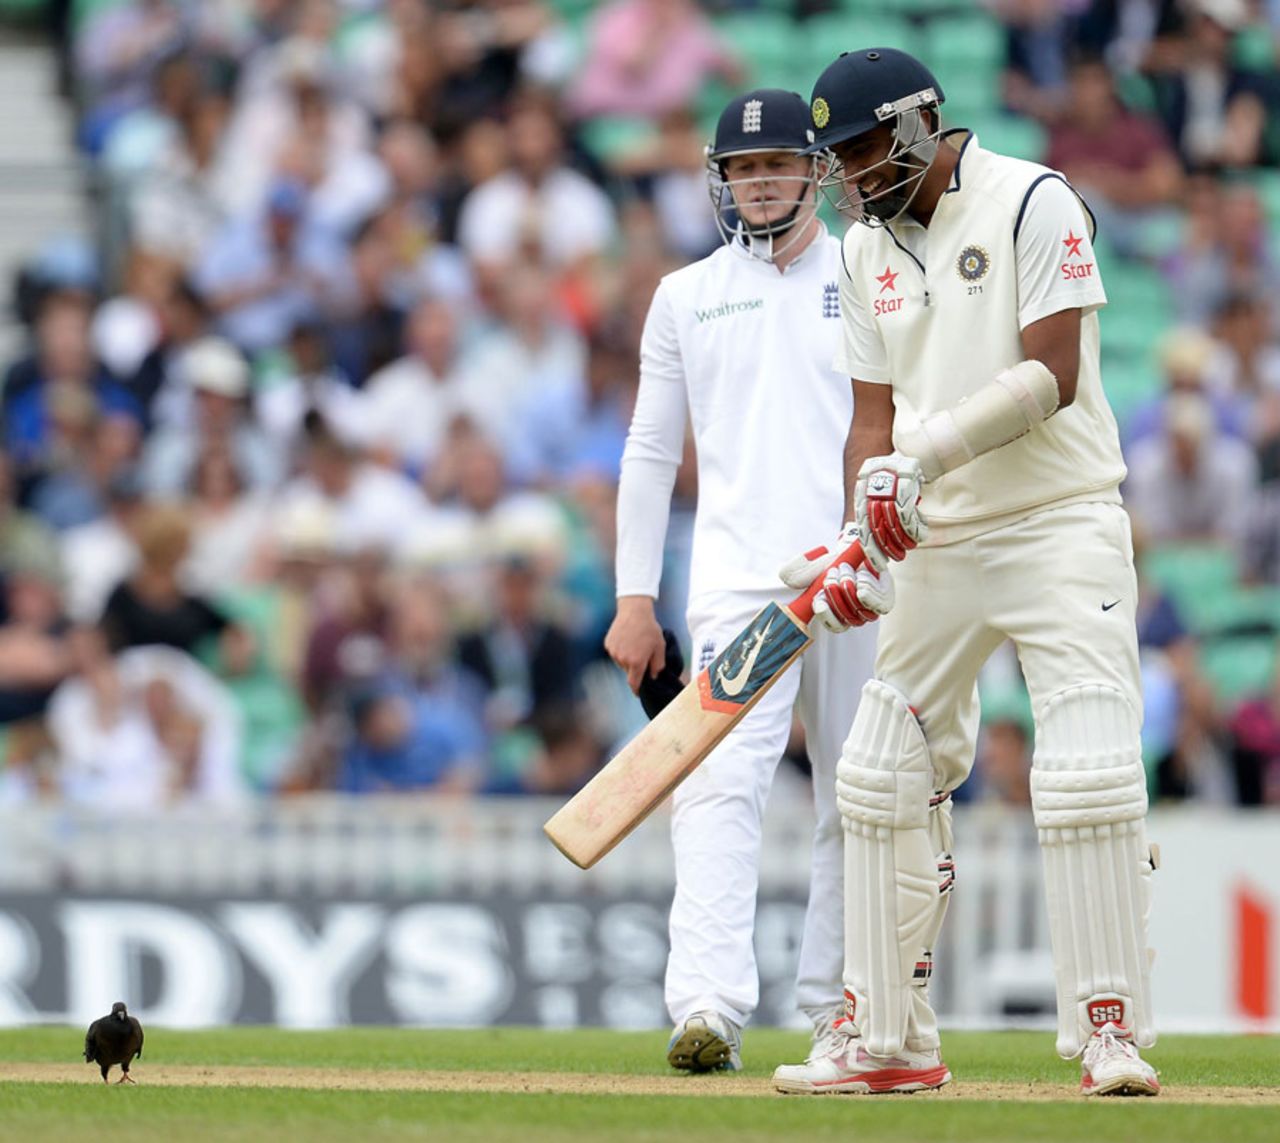 R Ashwin tries to chase a pigeon away, England v India, 5th Investec Test, The Oval, 1st day, August 15, 2014